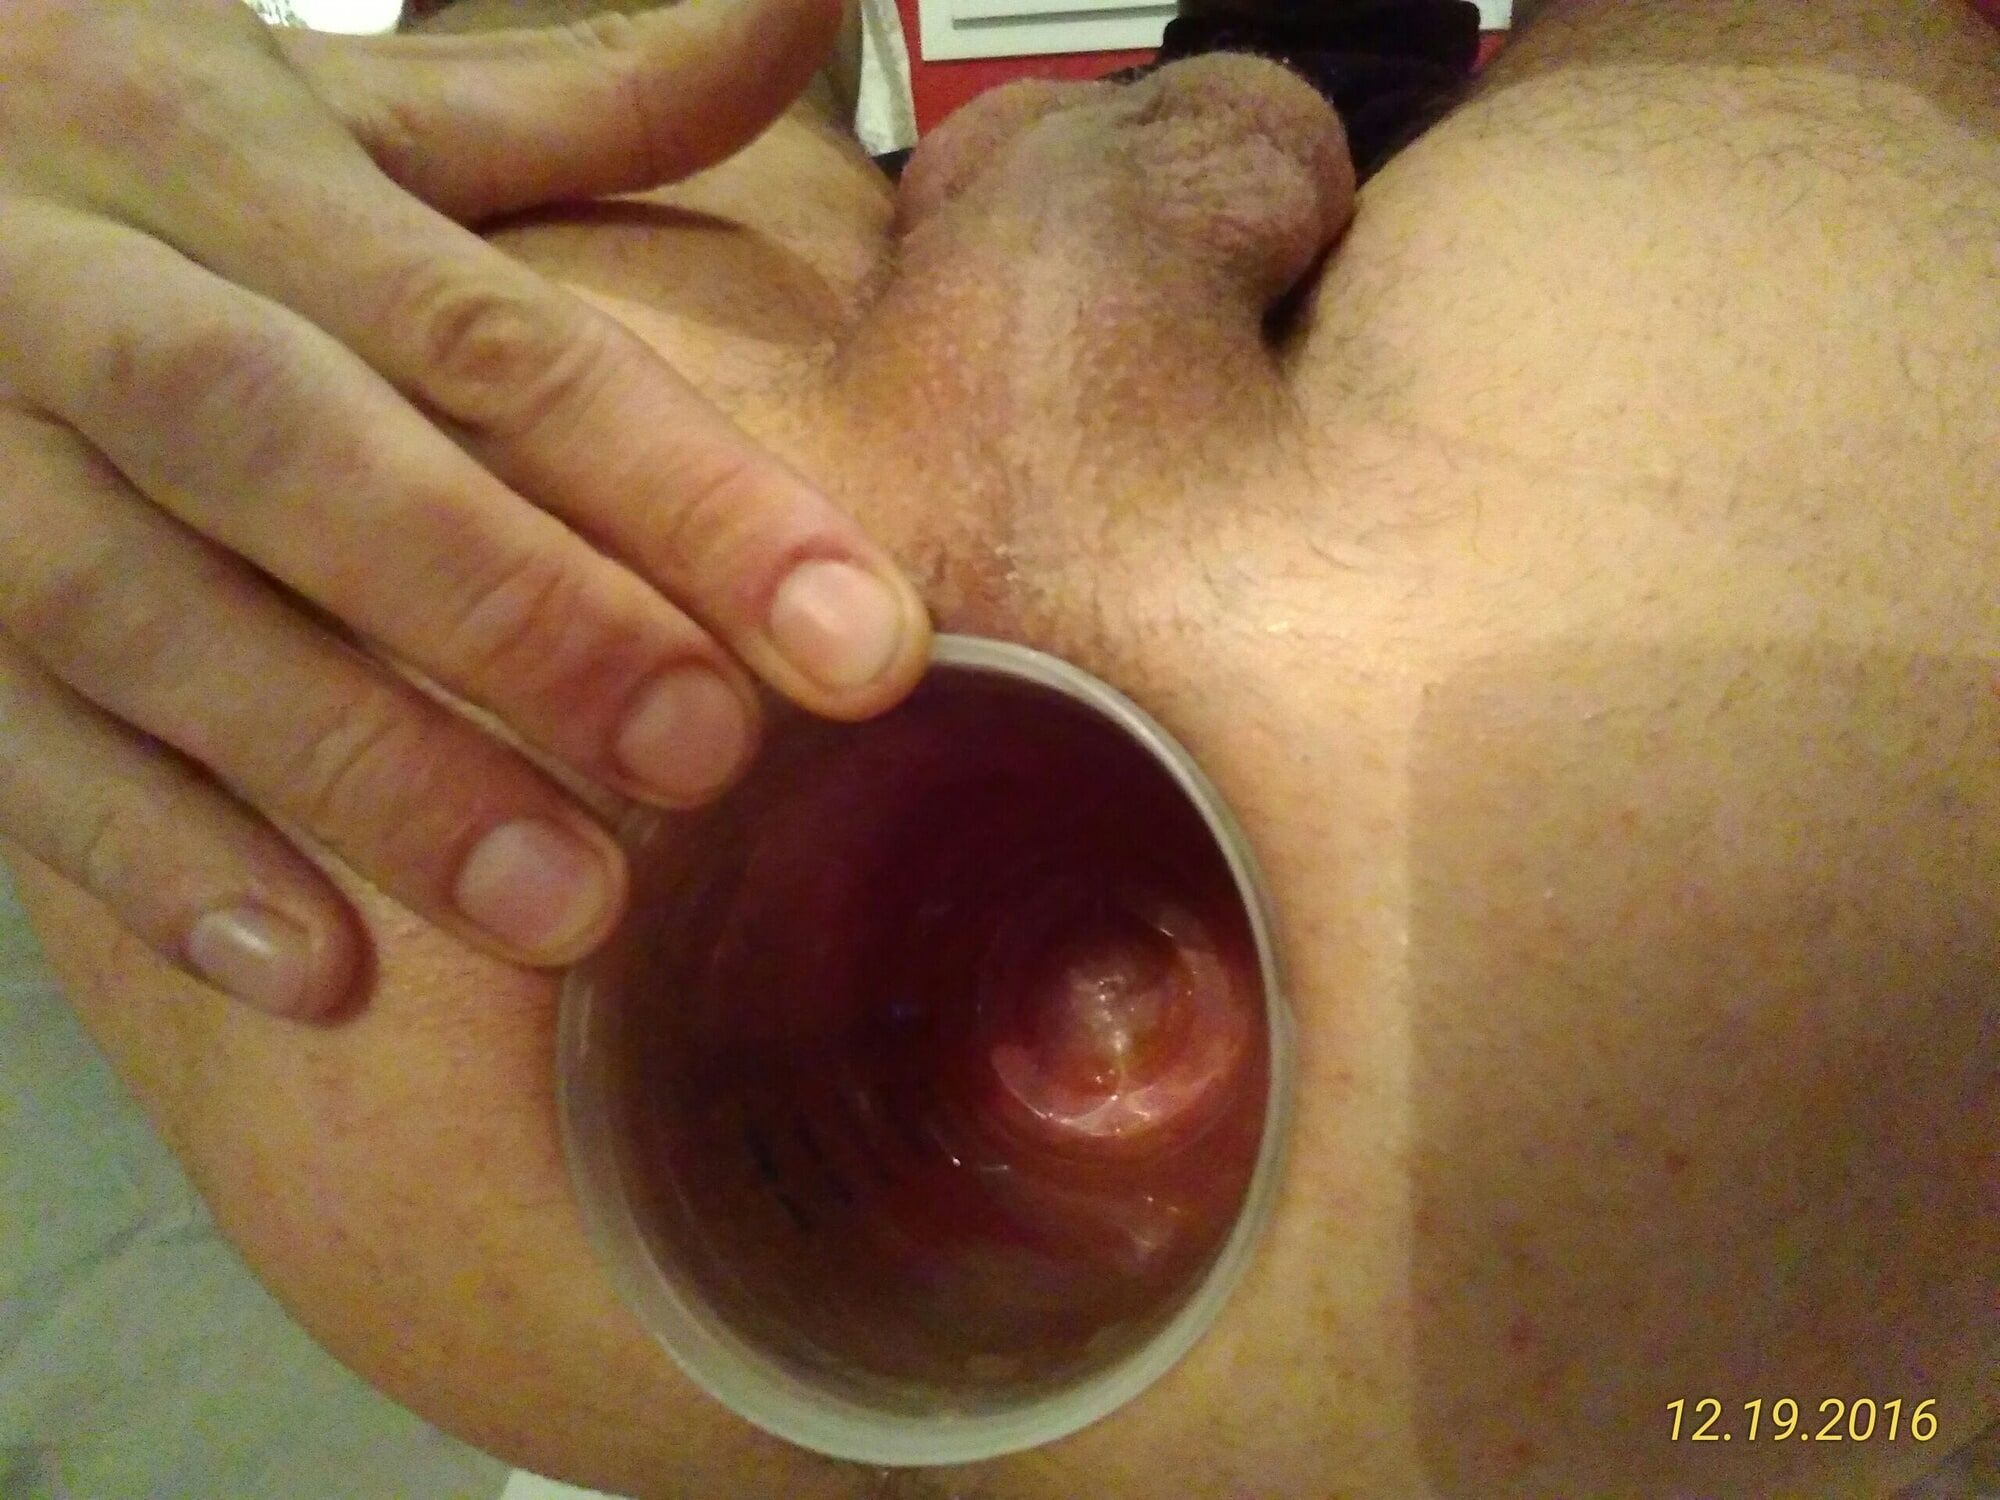 Young bitch sissy boy for old pervert guy #23